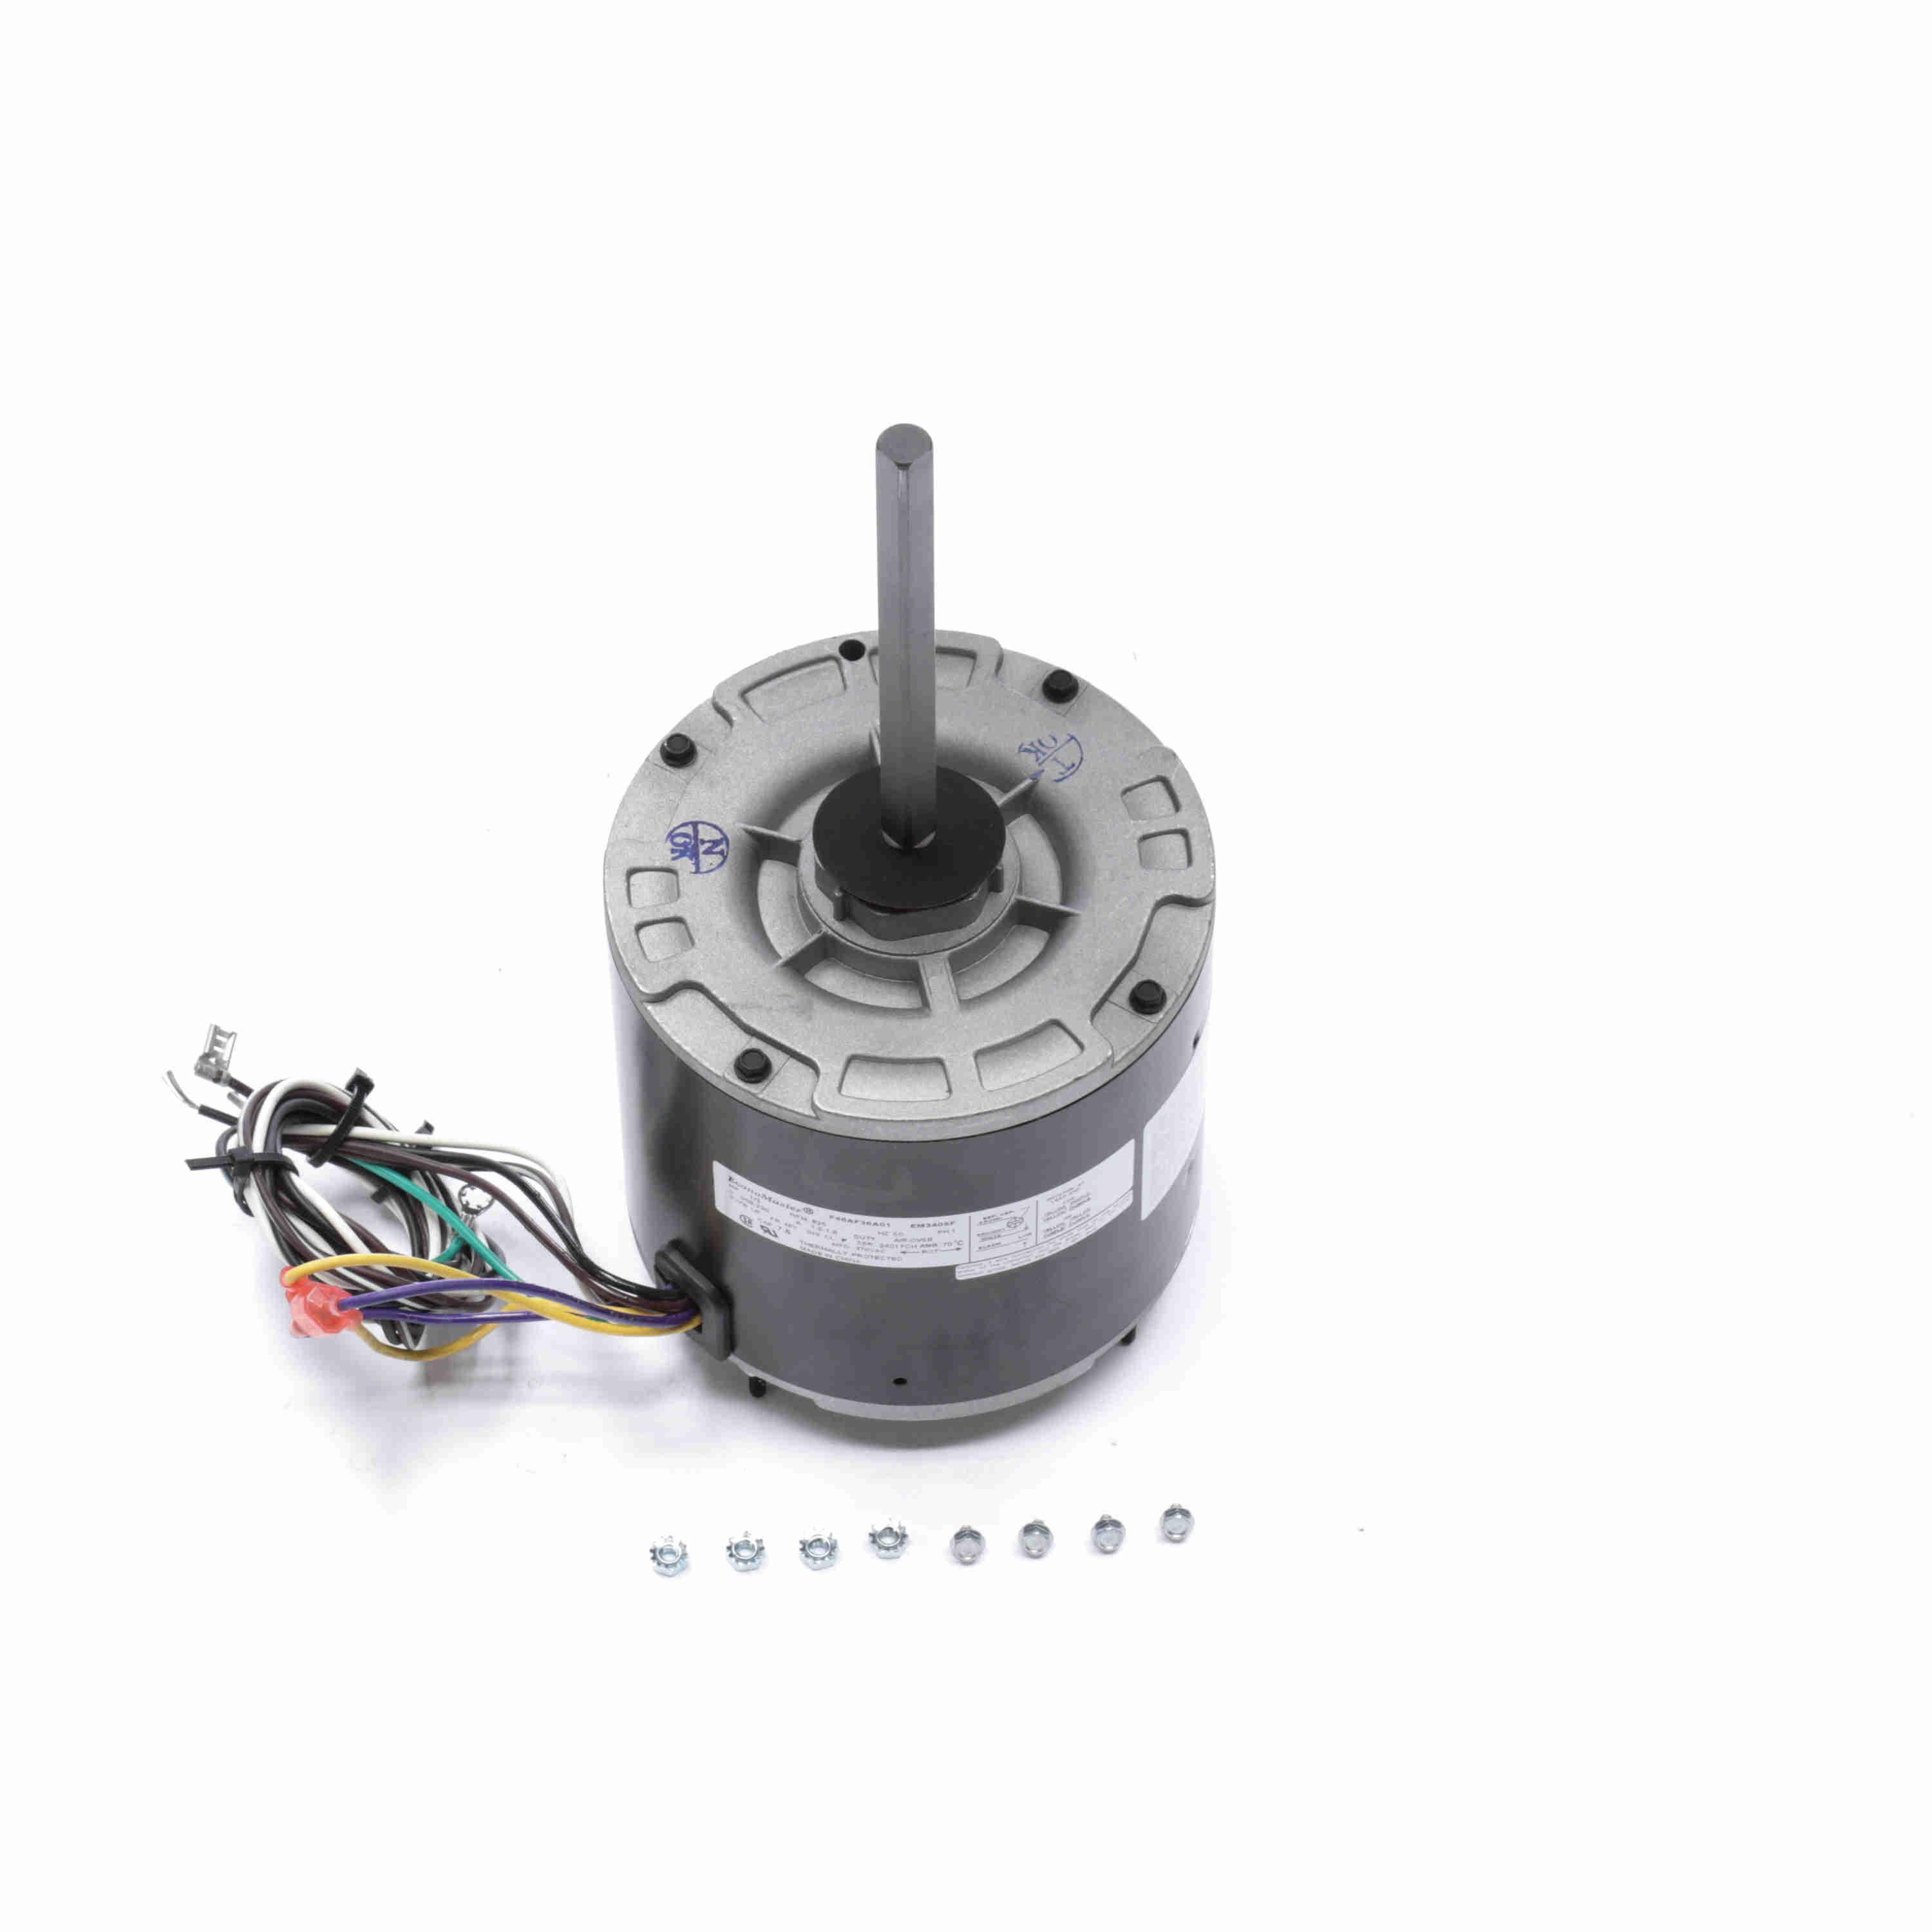 Century® EM3405F 8-Pole HVAC/R Motor, Totally Enclosed Air Over Enclosure, 1/3 hp, 208 to 230 V, 60 Hz, 1 Phase, 48Y Frame, 825 rpm Speed, Extended Stud Mount